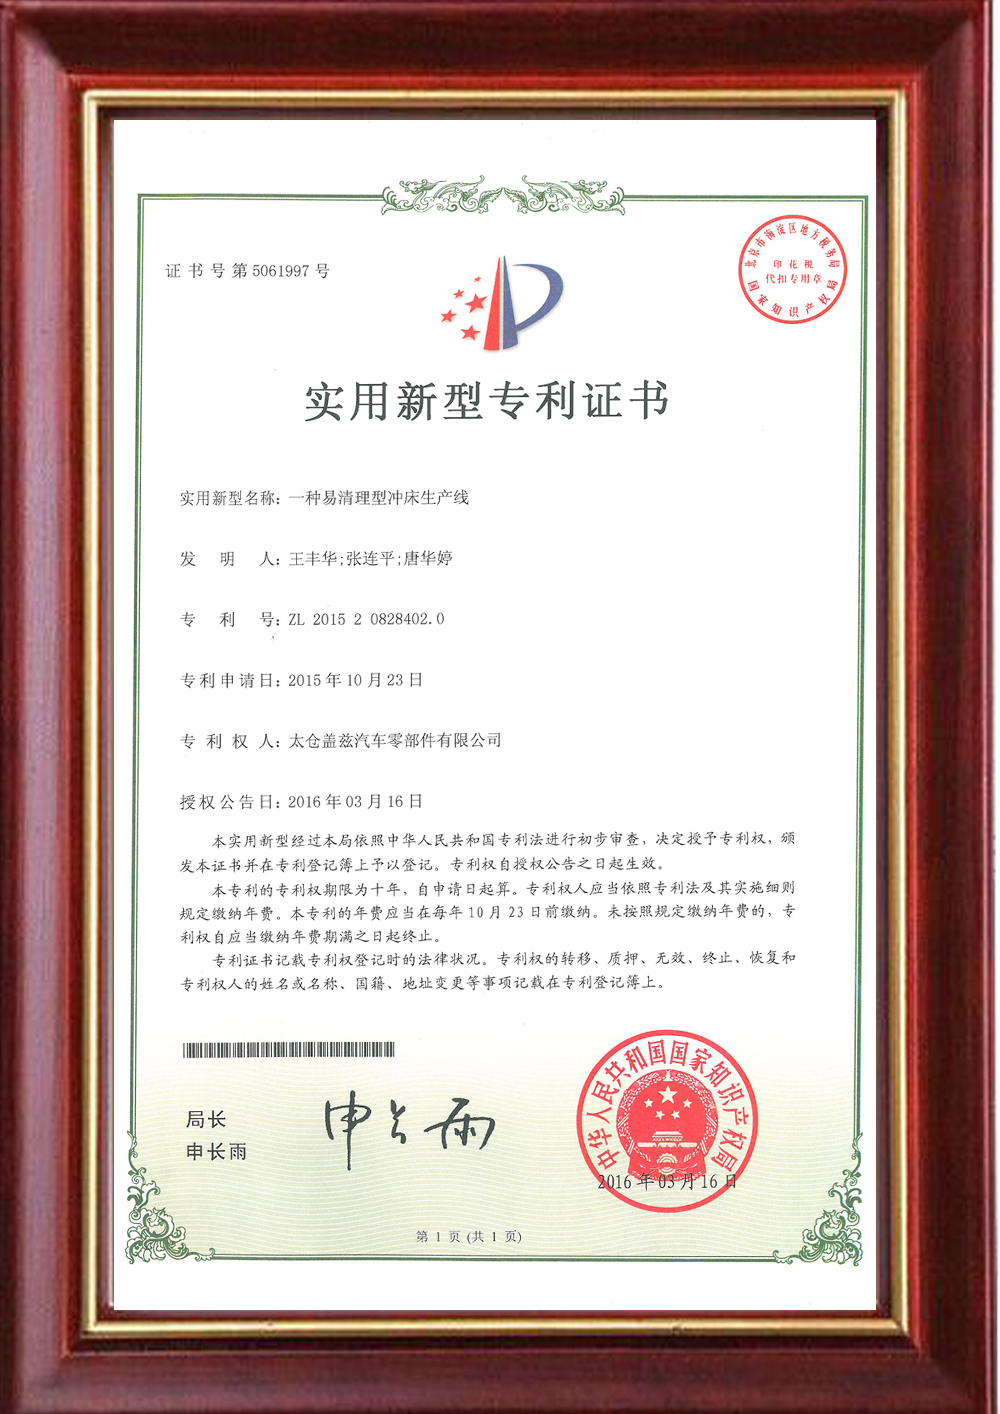 Utility model patent certificate - punch production line